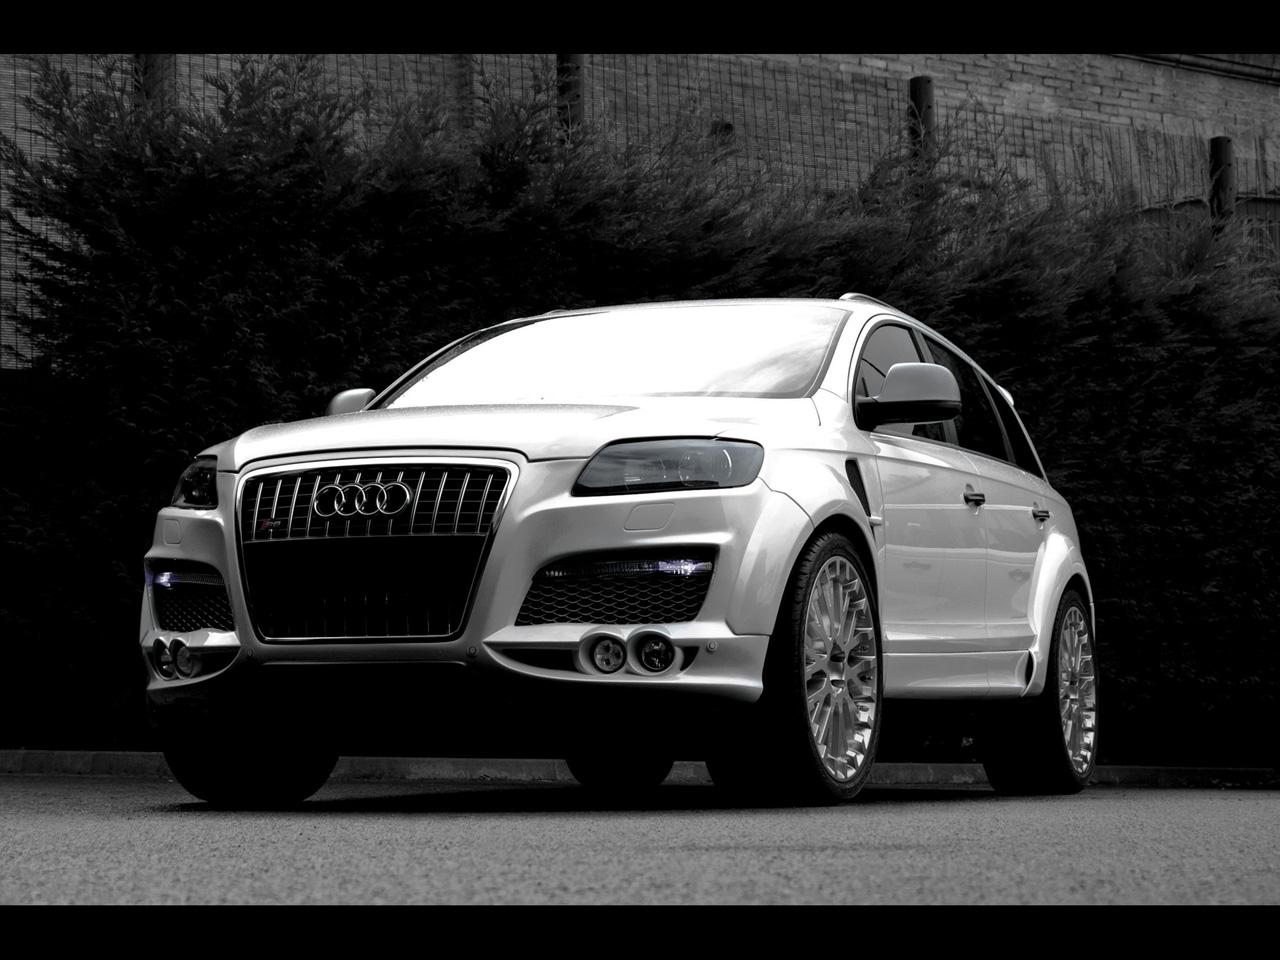 q7 wallpapers white 2 audi q7 wallpapers white 3 audi q7 wallpapers ...